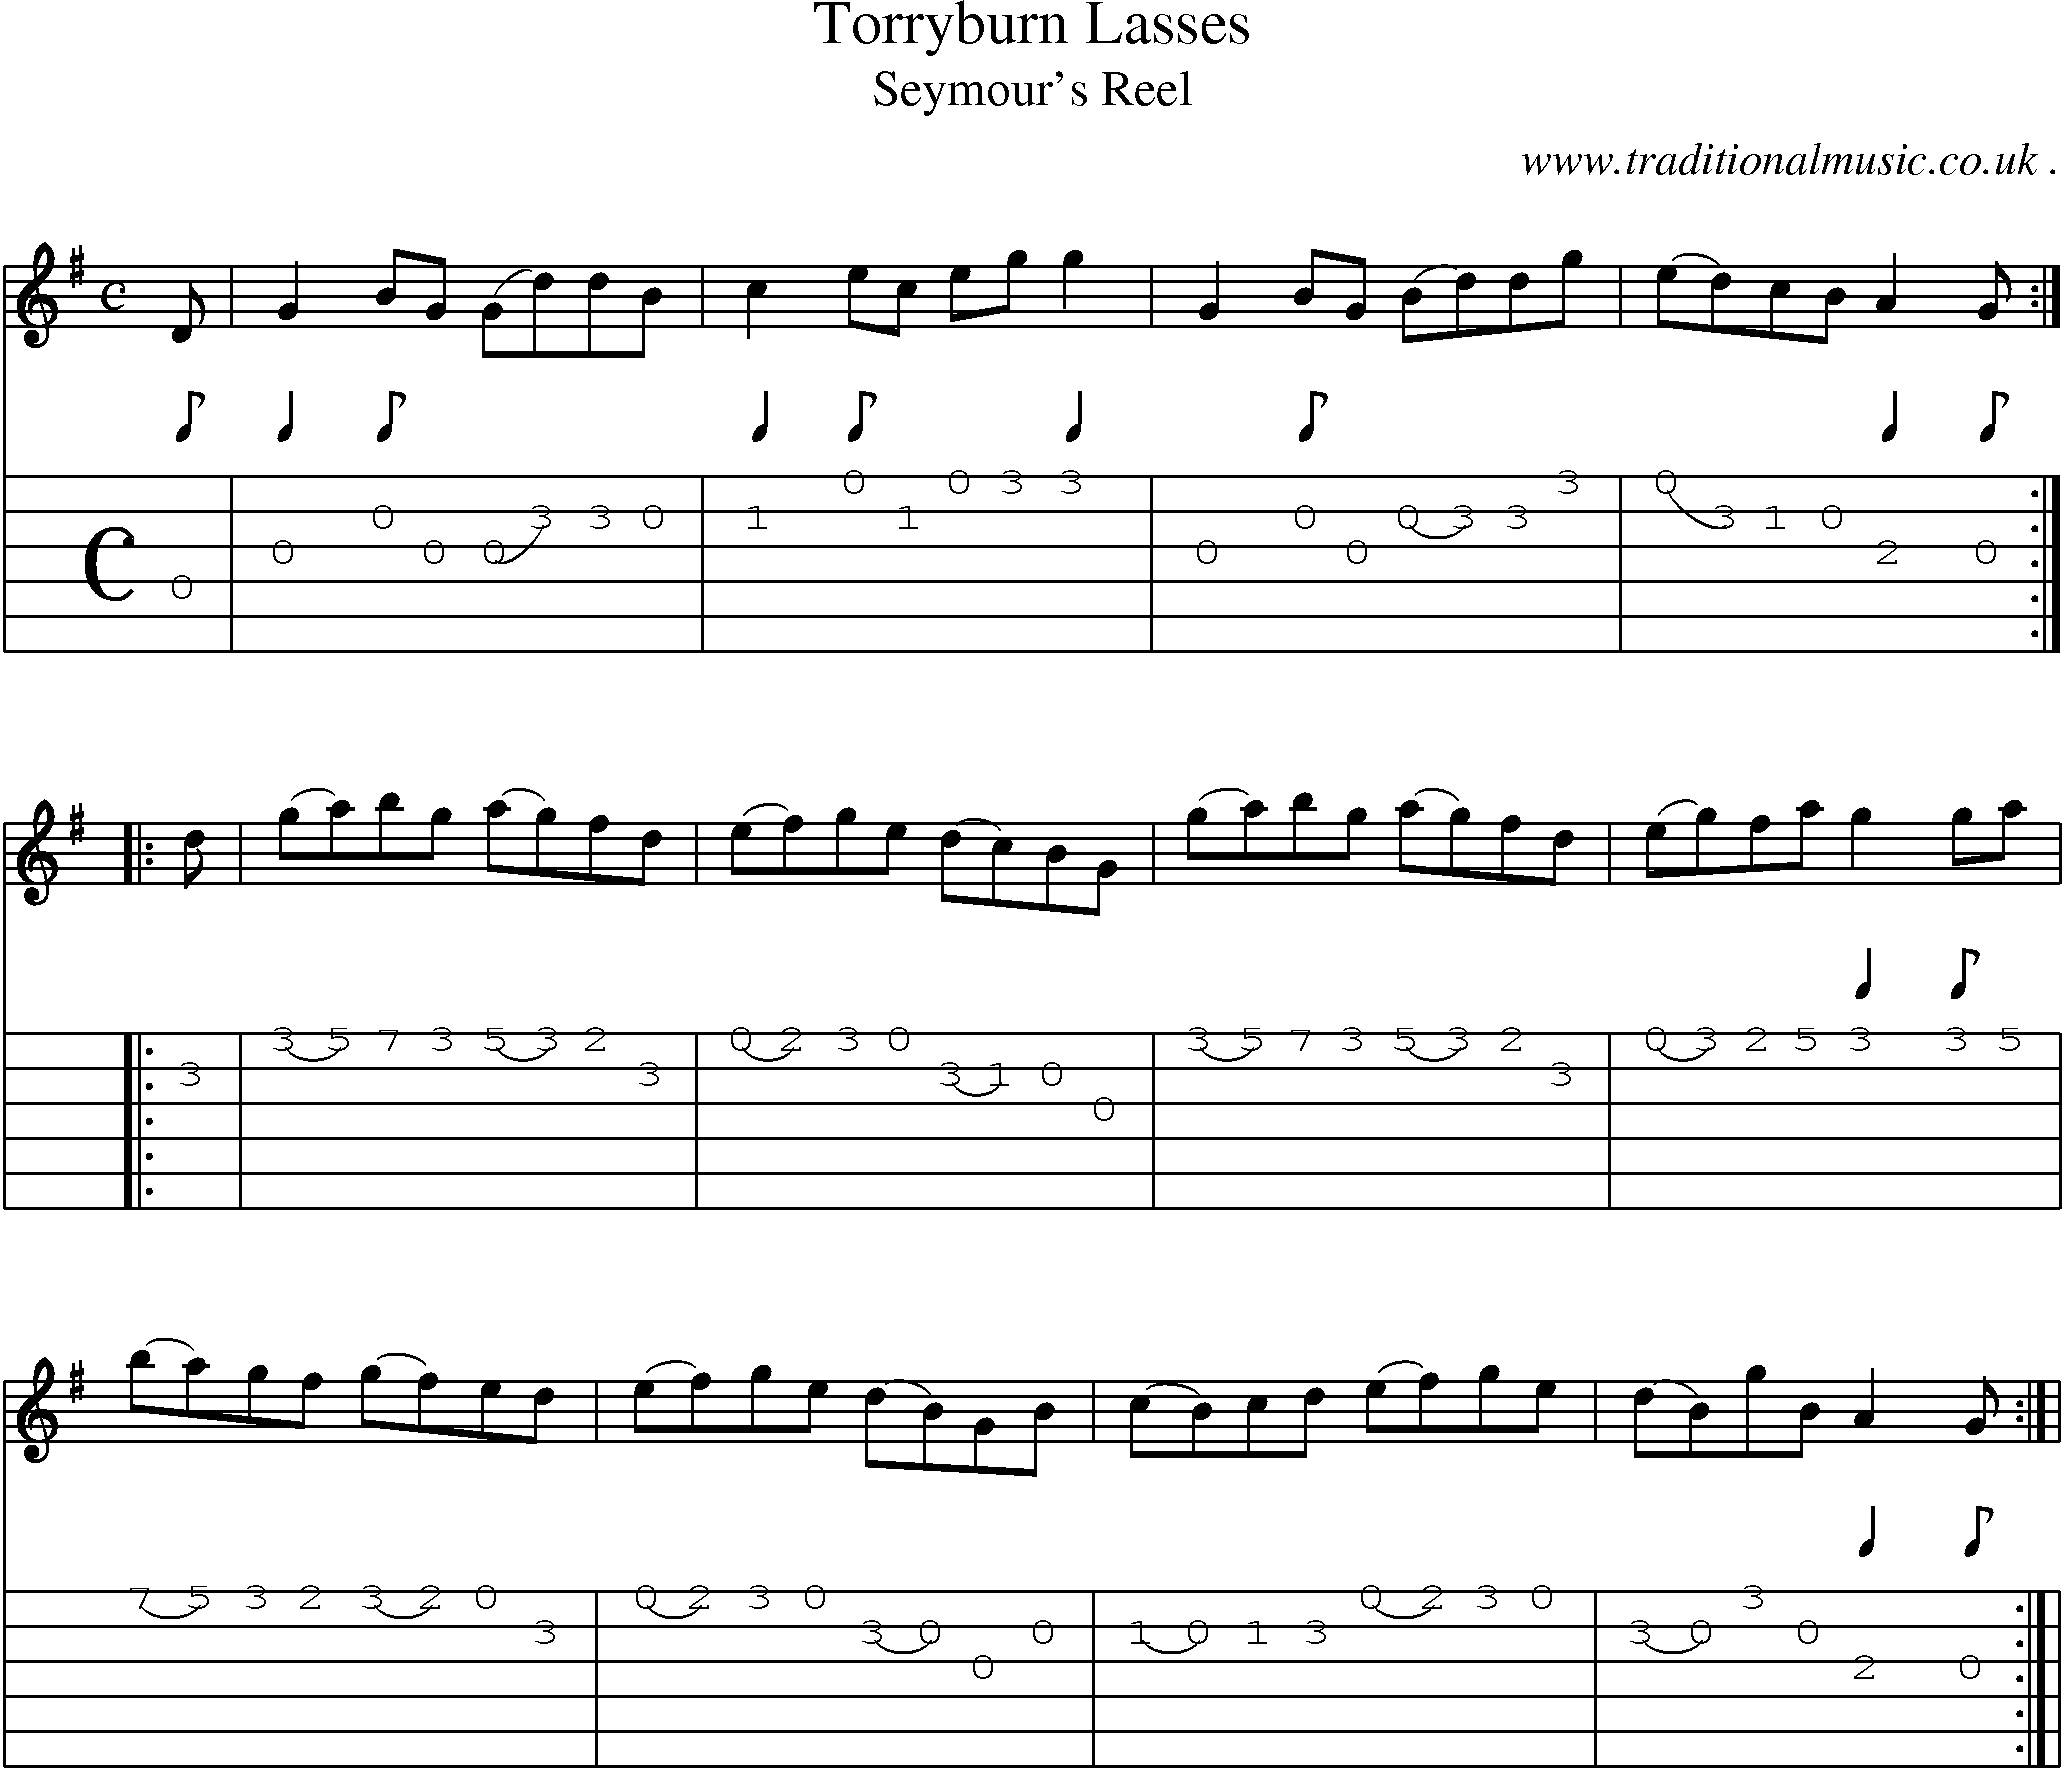 Sheet-Music and Guitar Tabs for Torryburn Lasses 